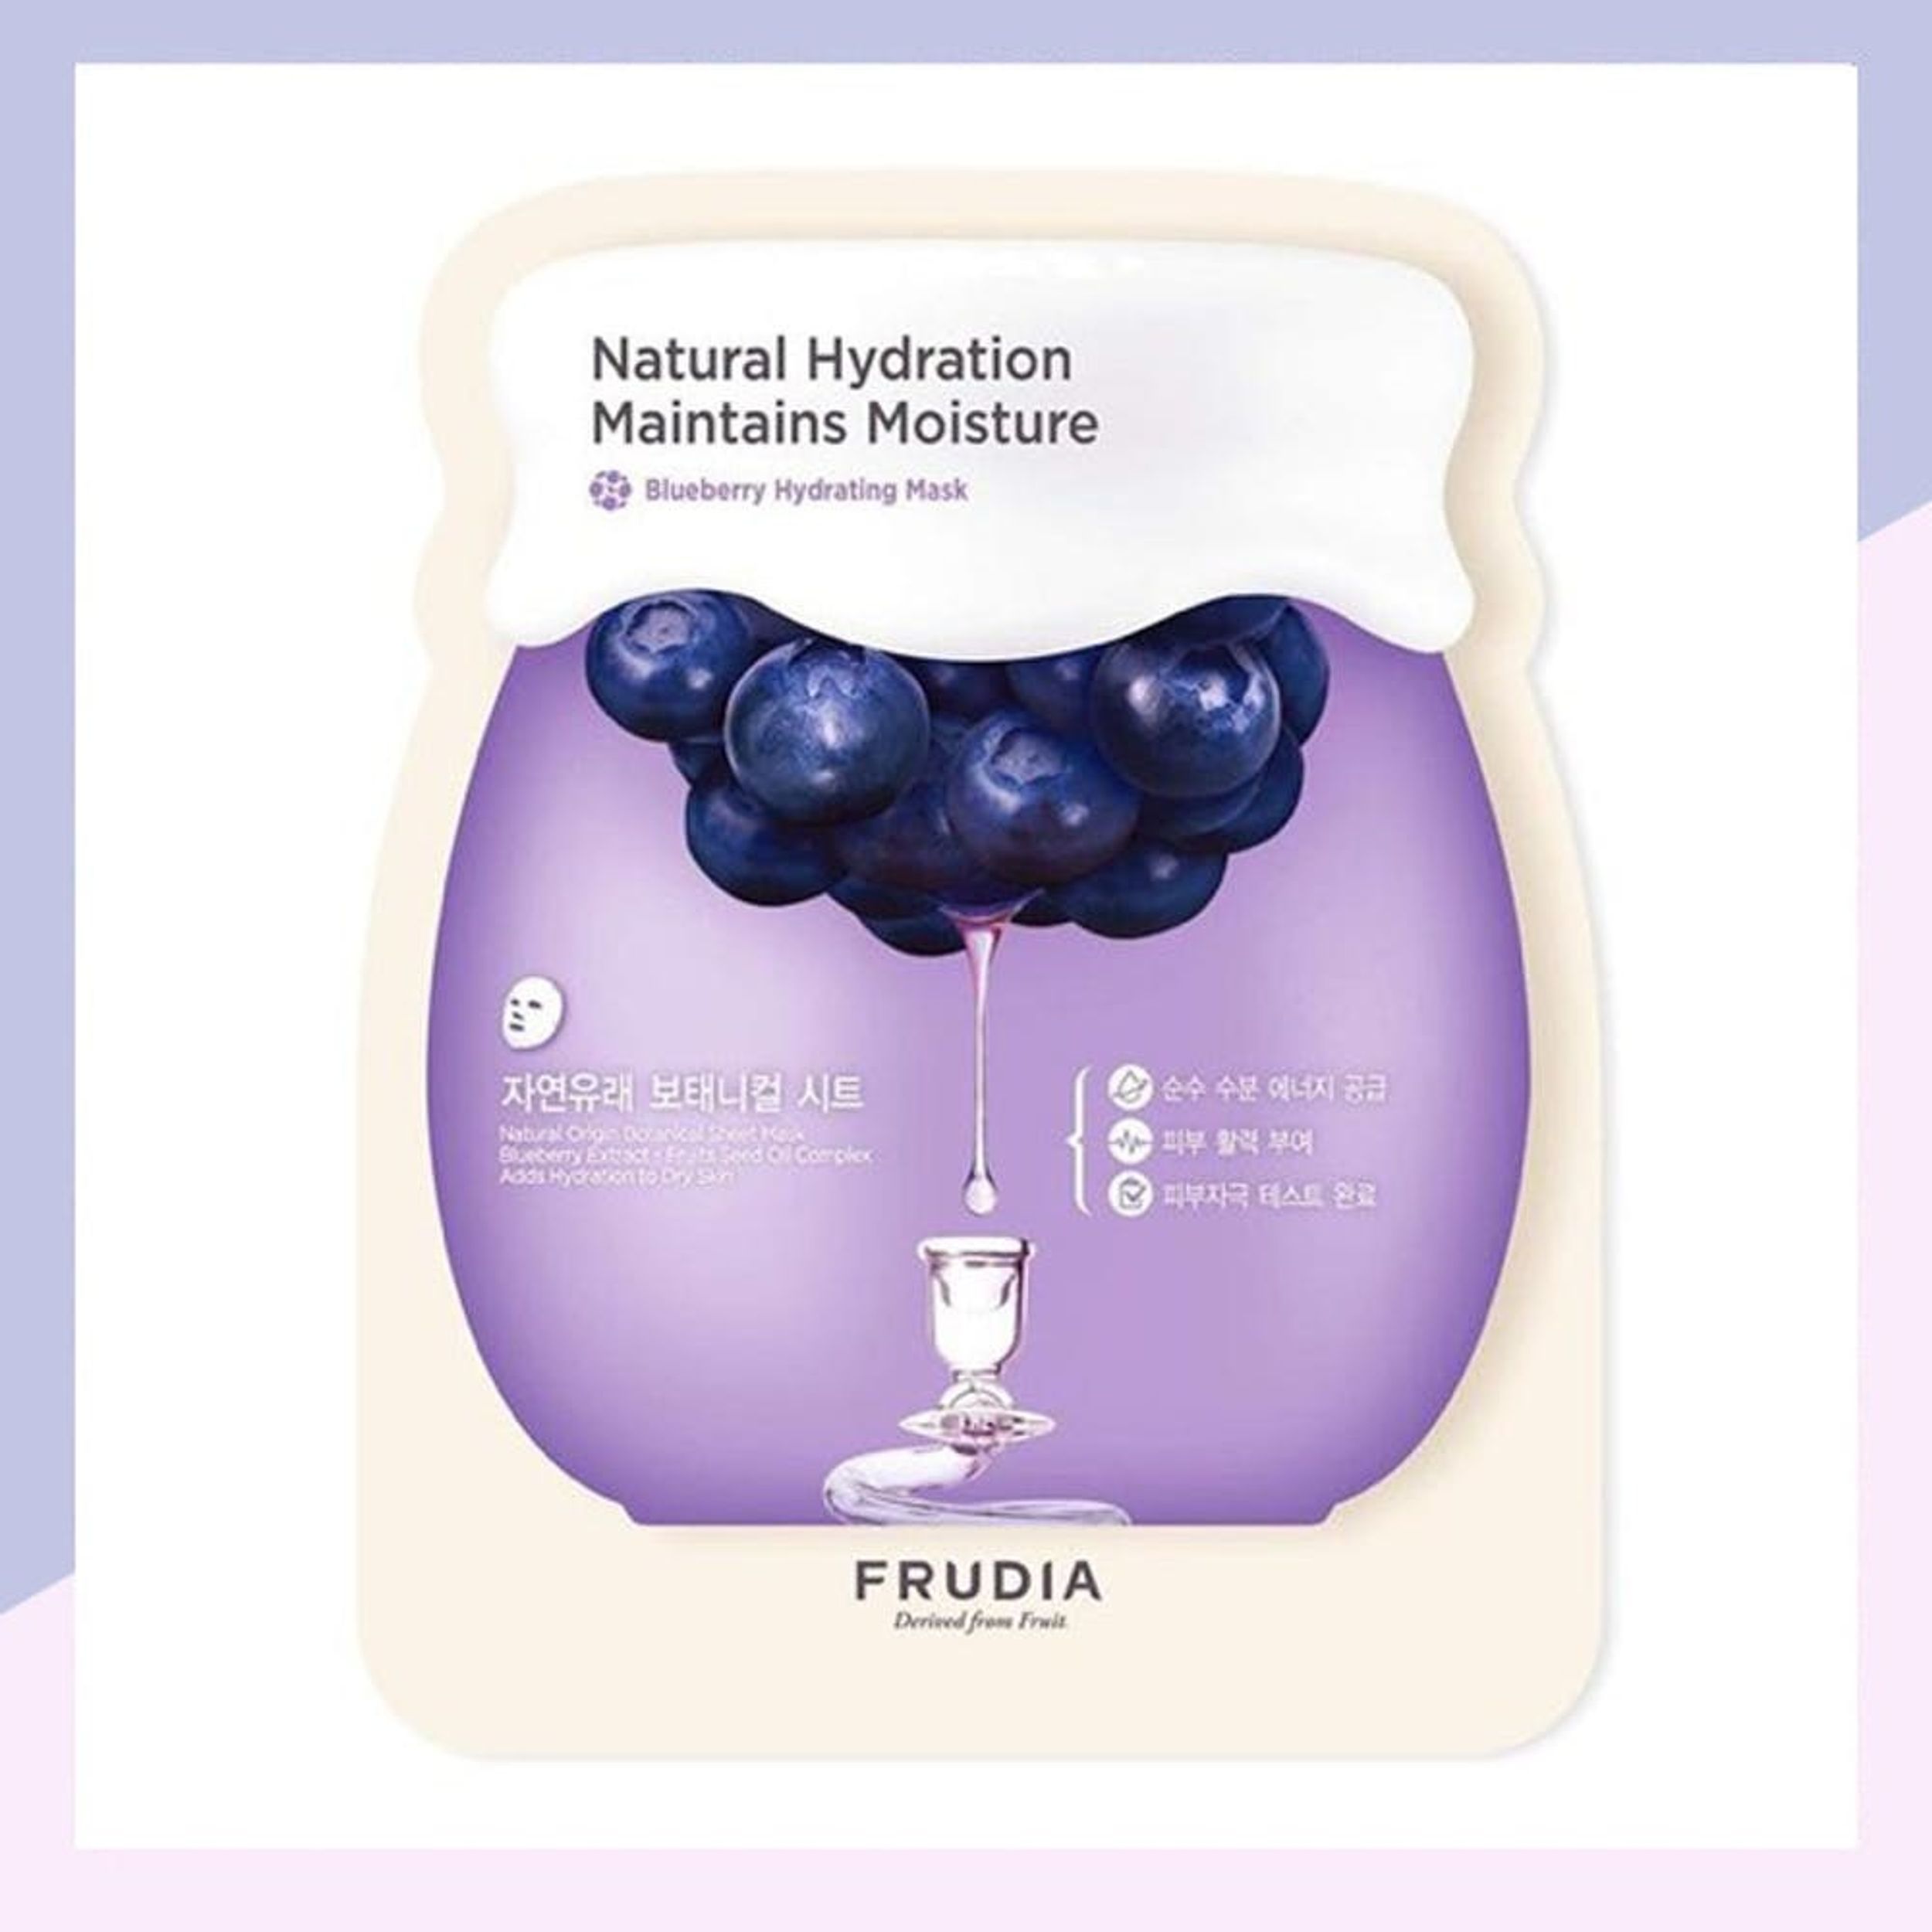 6 Blueberry-Based Beauty Products That Will Enrich Your Skin This Season